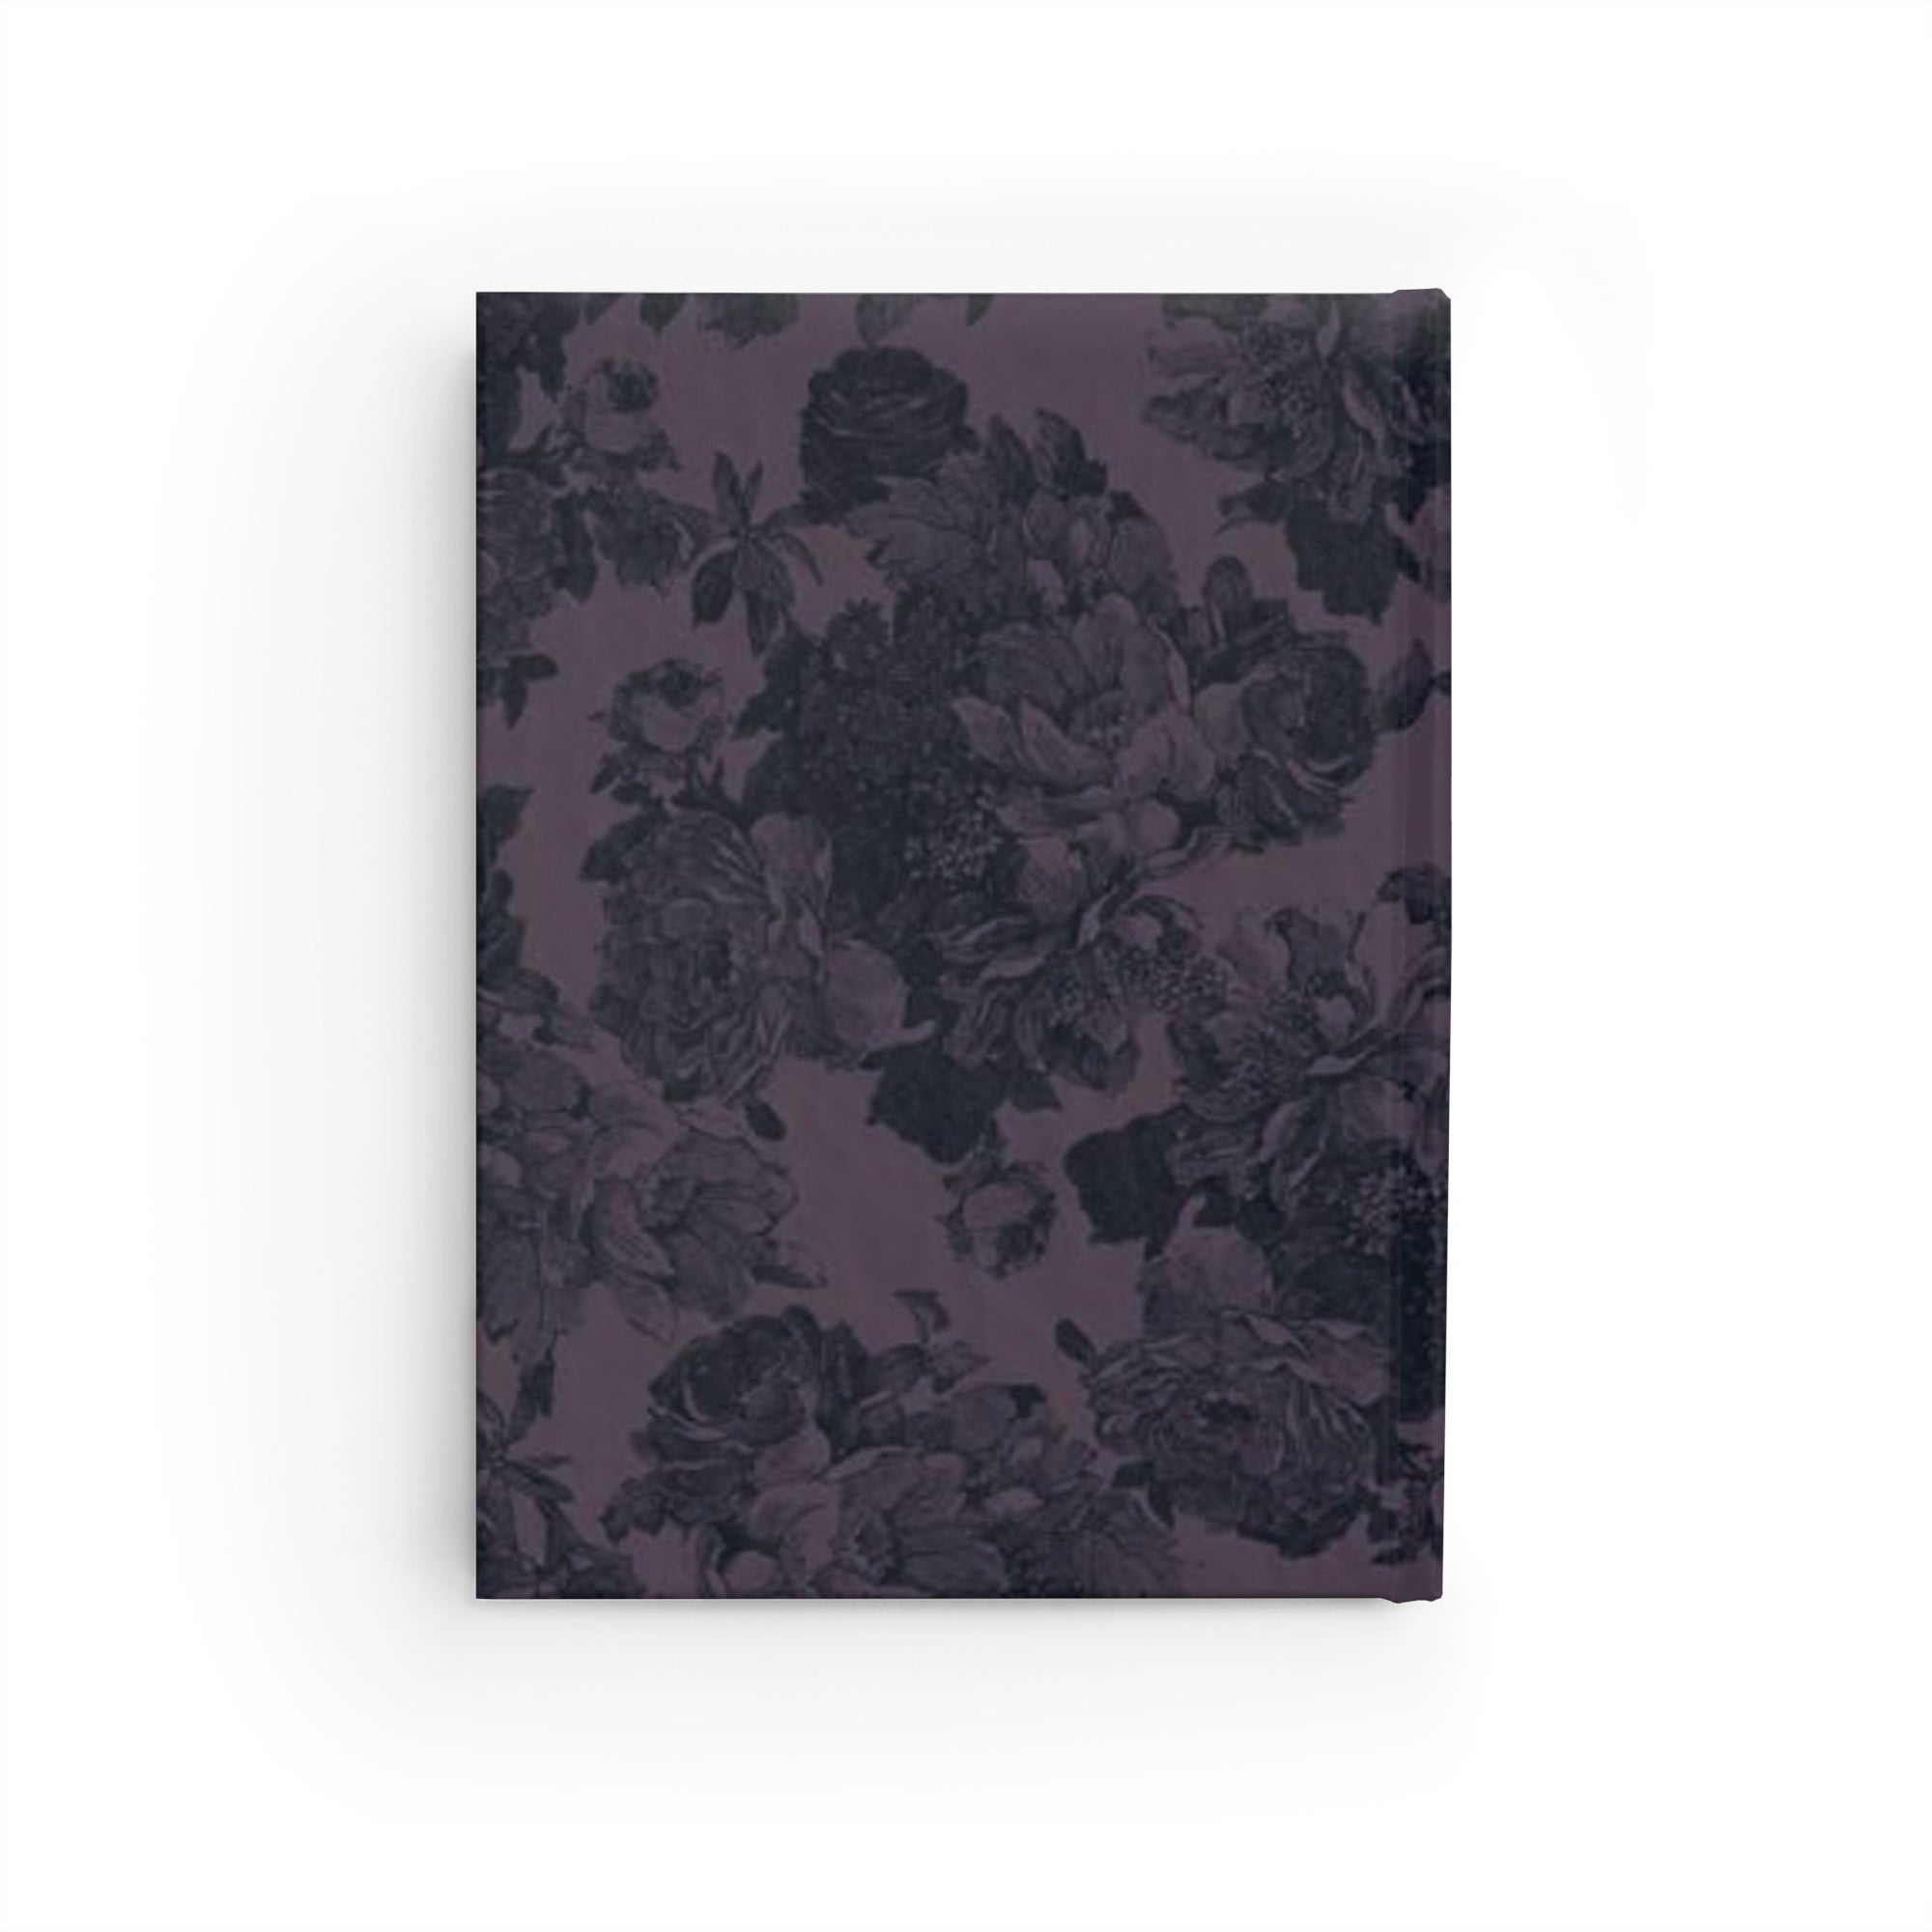 Dark Floral Hard Cover Journal Notebook, Dark Journals, Blank Journal, Vintage journal, Writers journal, writing, Designed cute journals personalized gifts-gifts for teachers-gifts for students-Paper products-Dalge